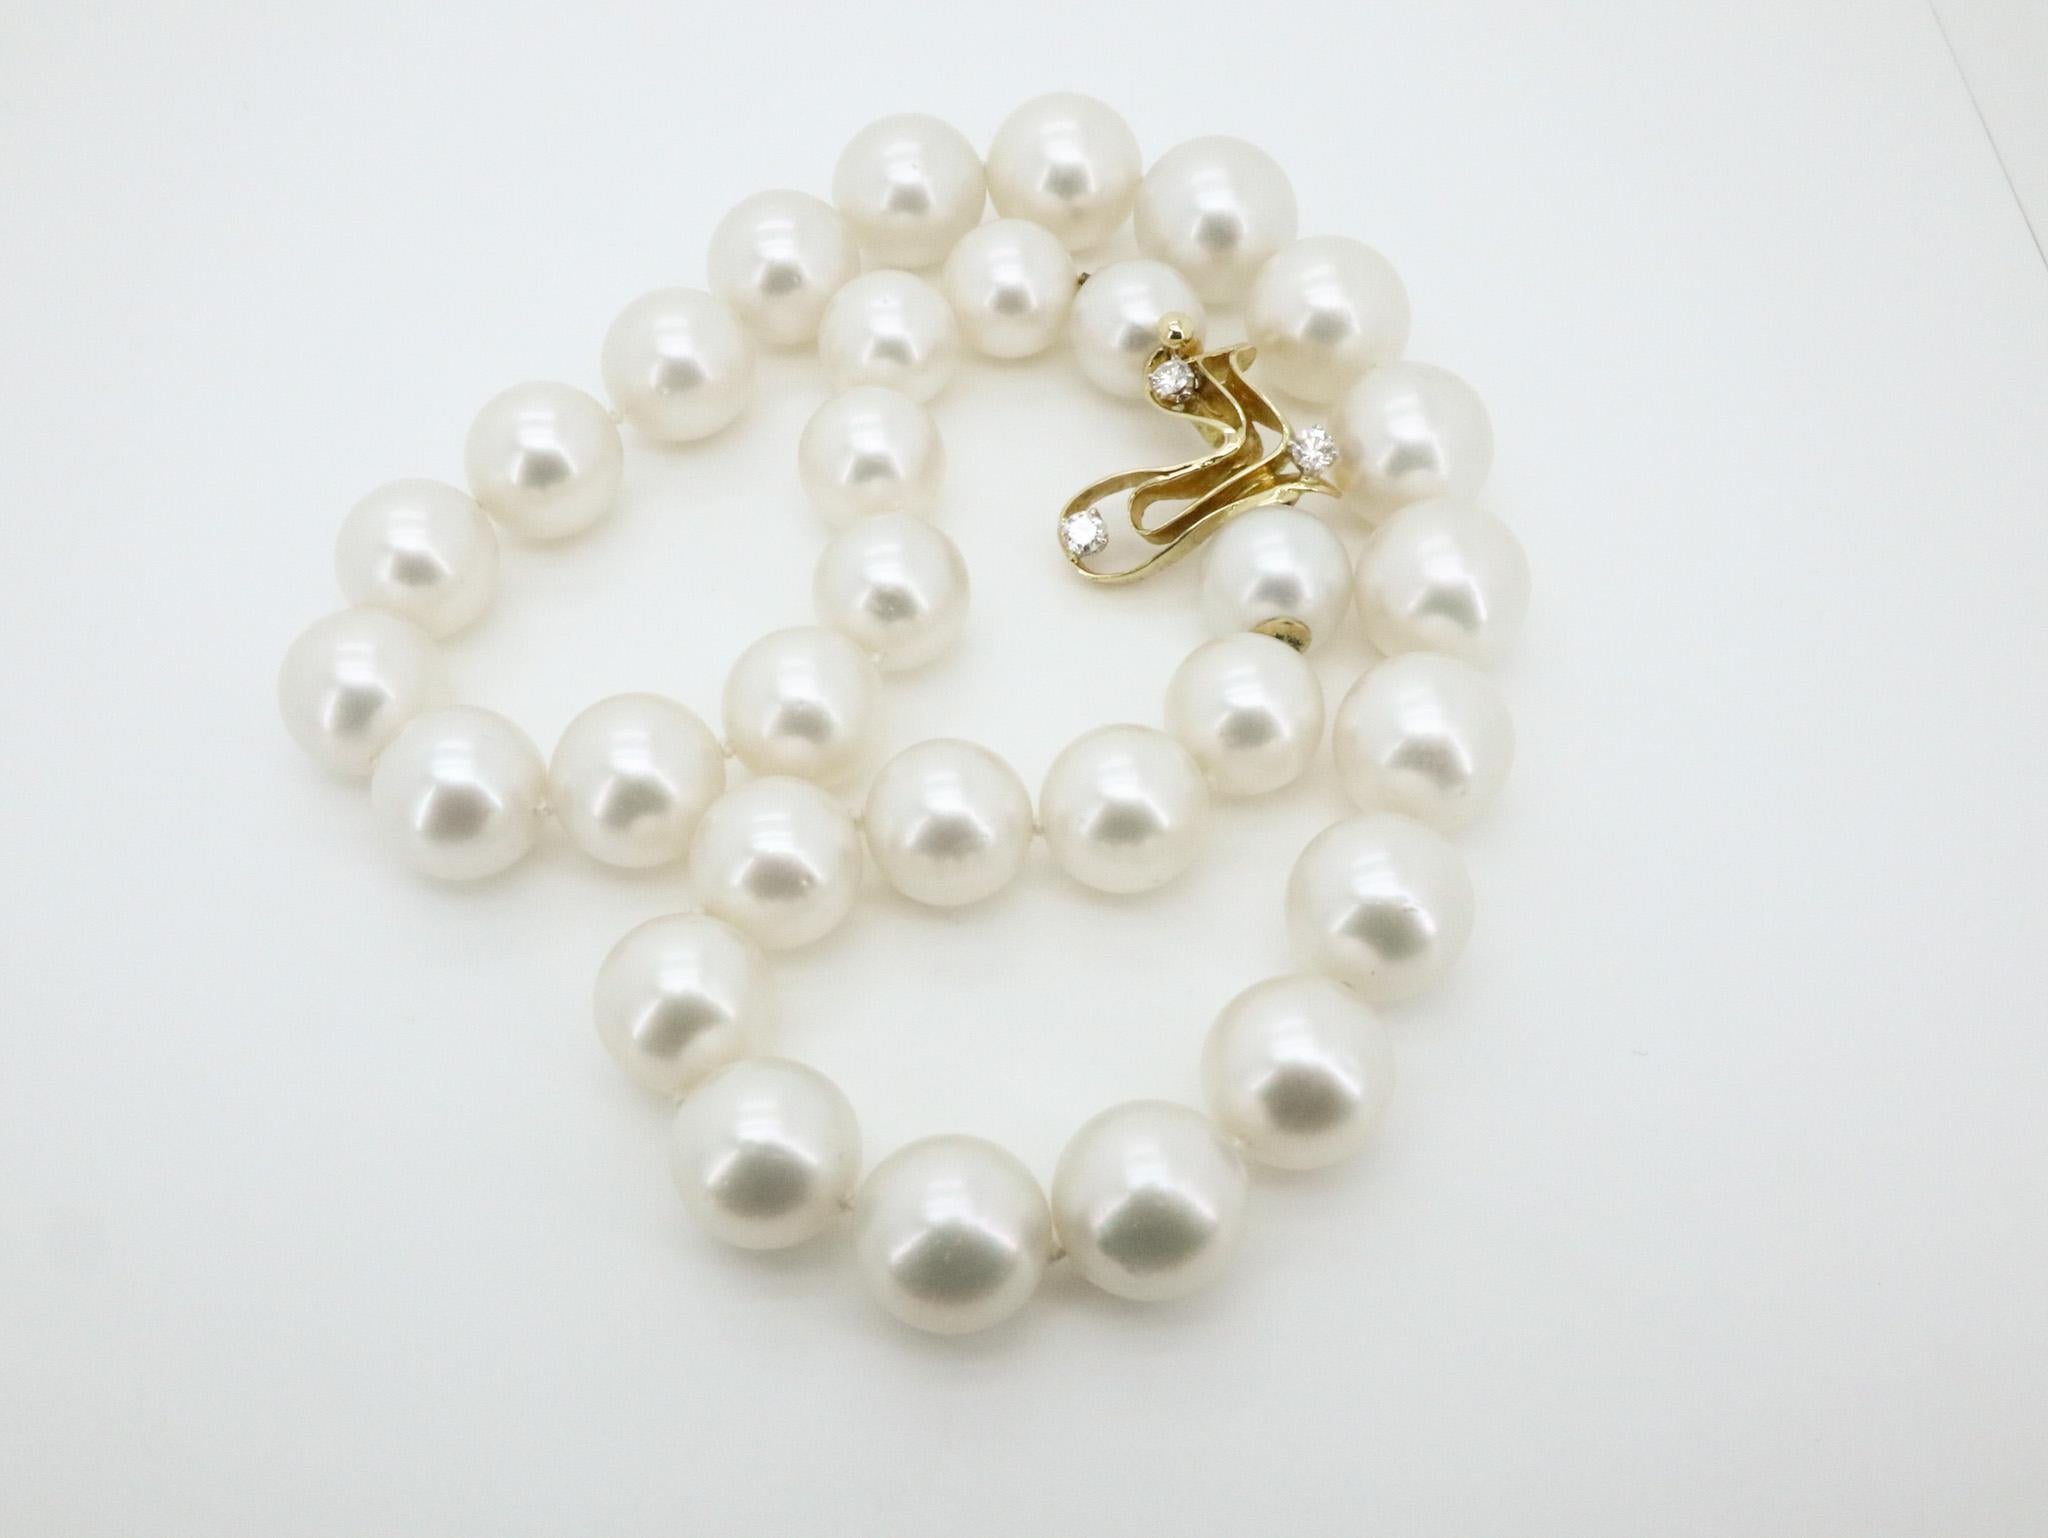 620 carat Australian South Sea Pearls 18K Yellow Gold  Diamonds Clasp Necklace For Sale 2